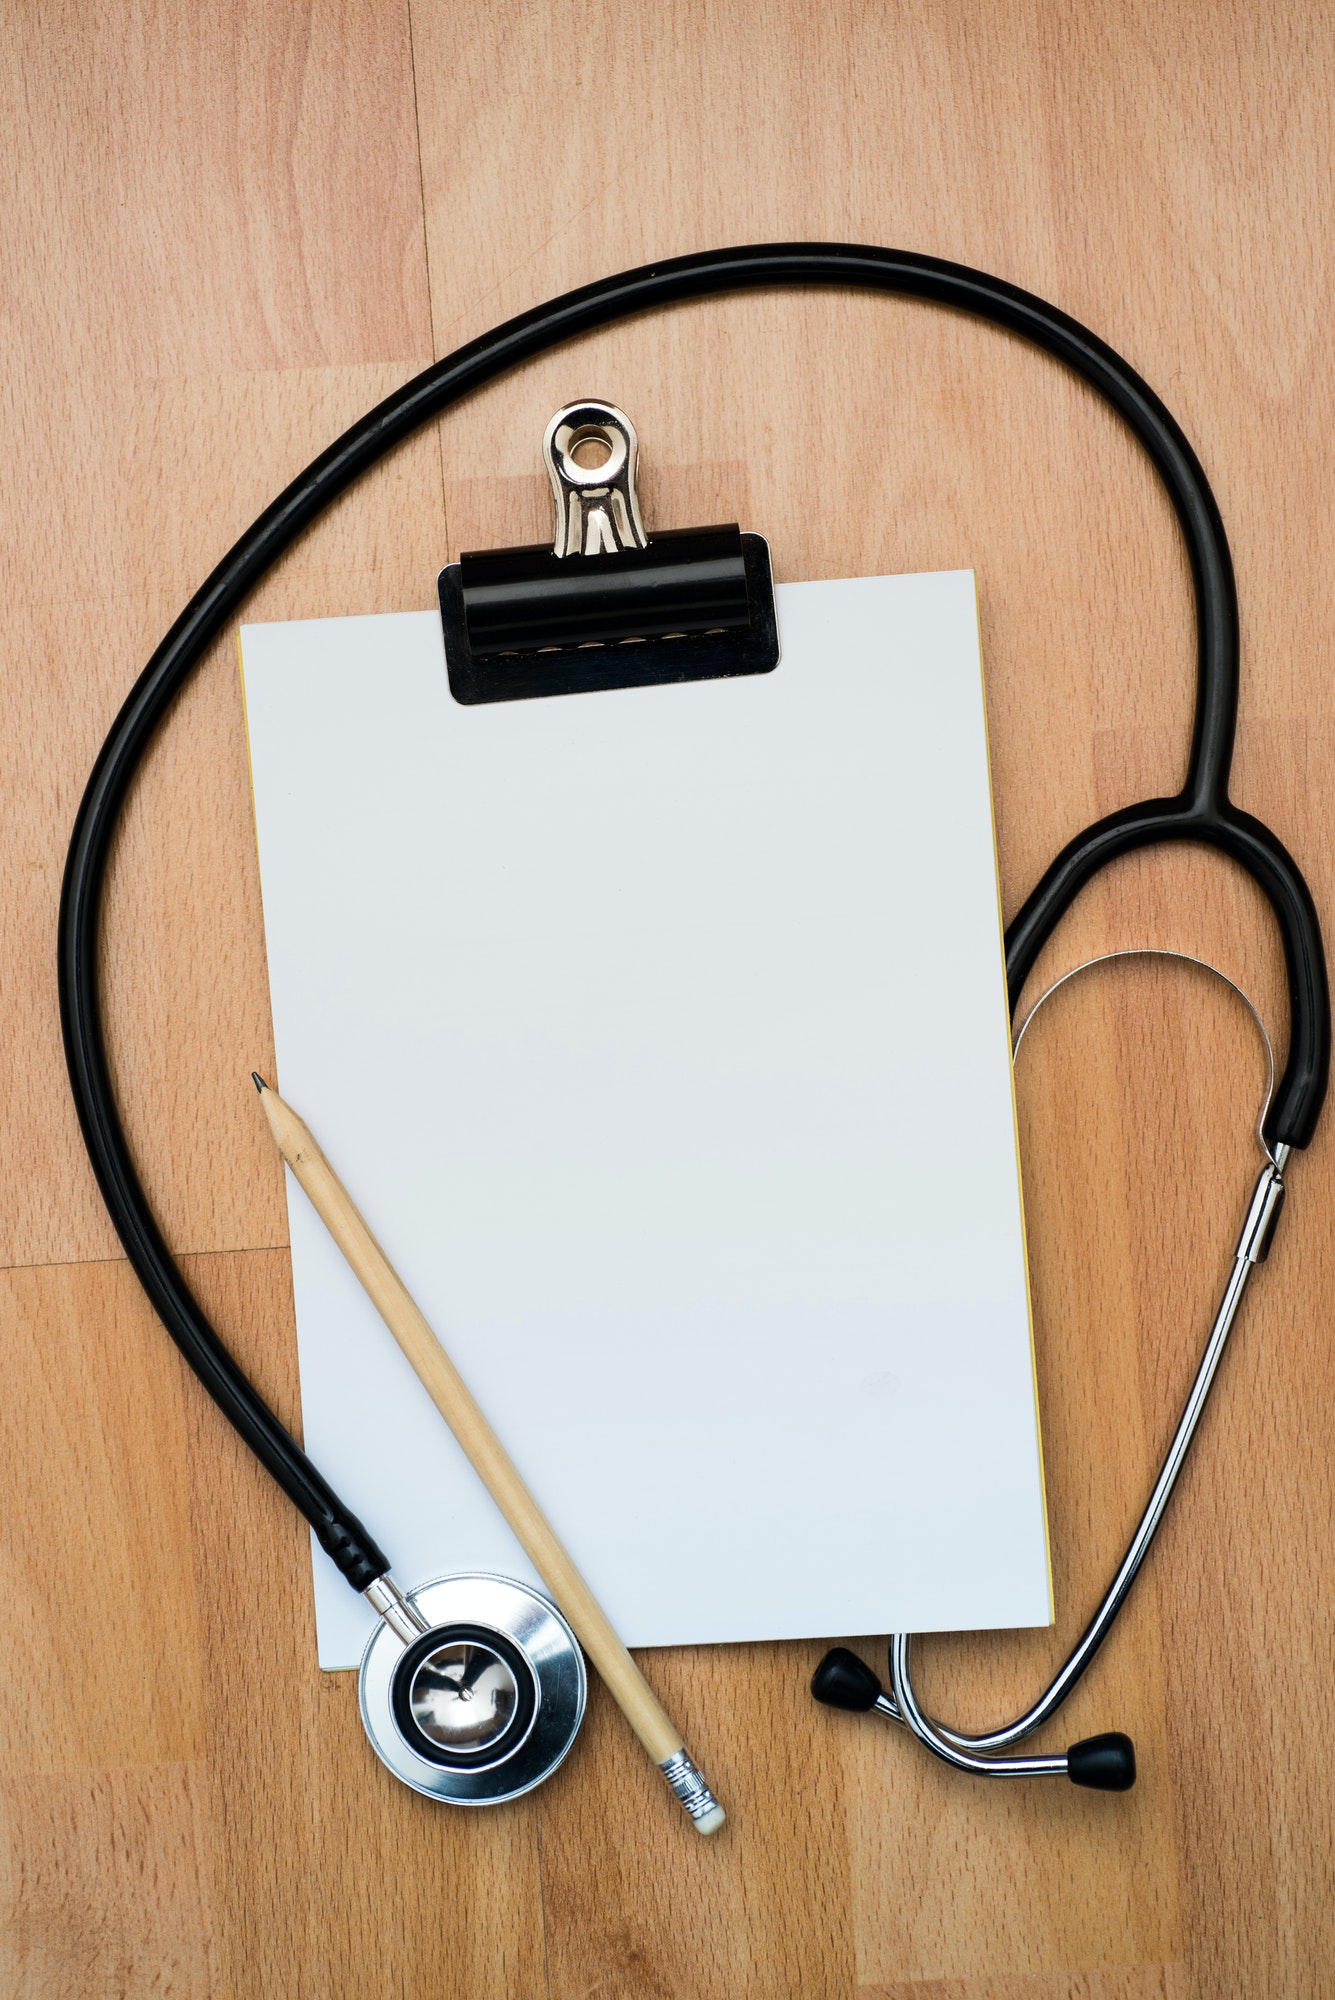 Clipboard with stethoscope